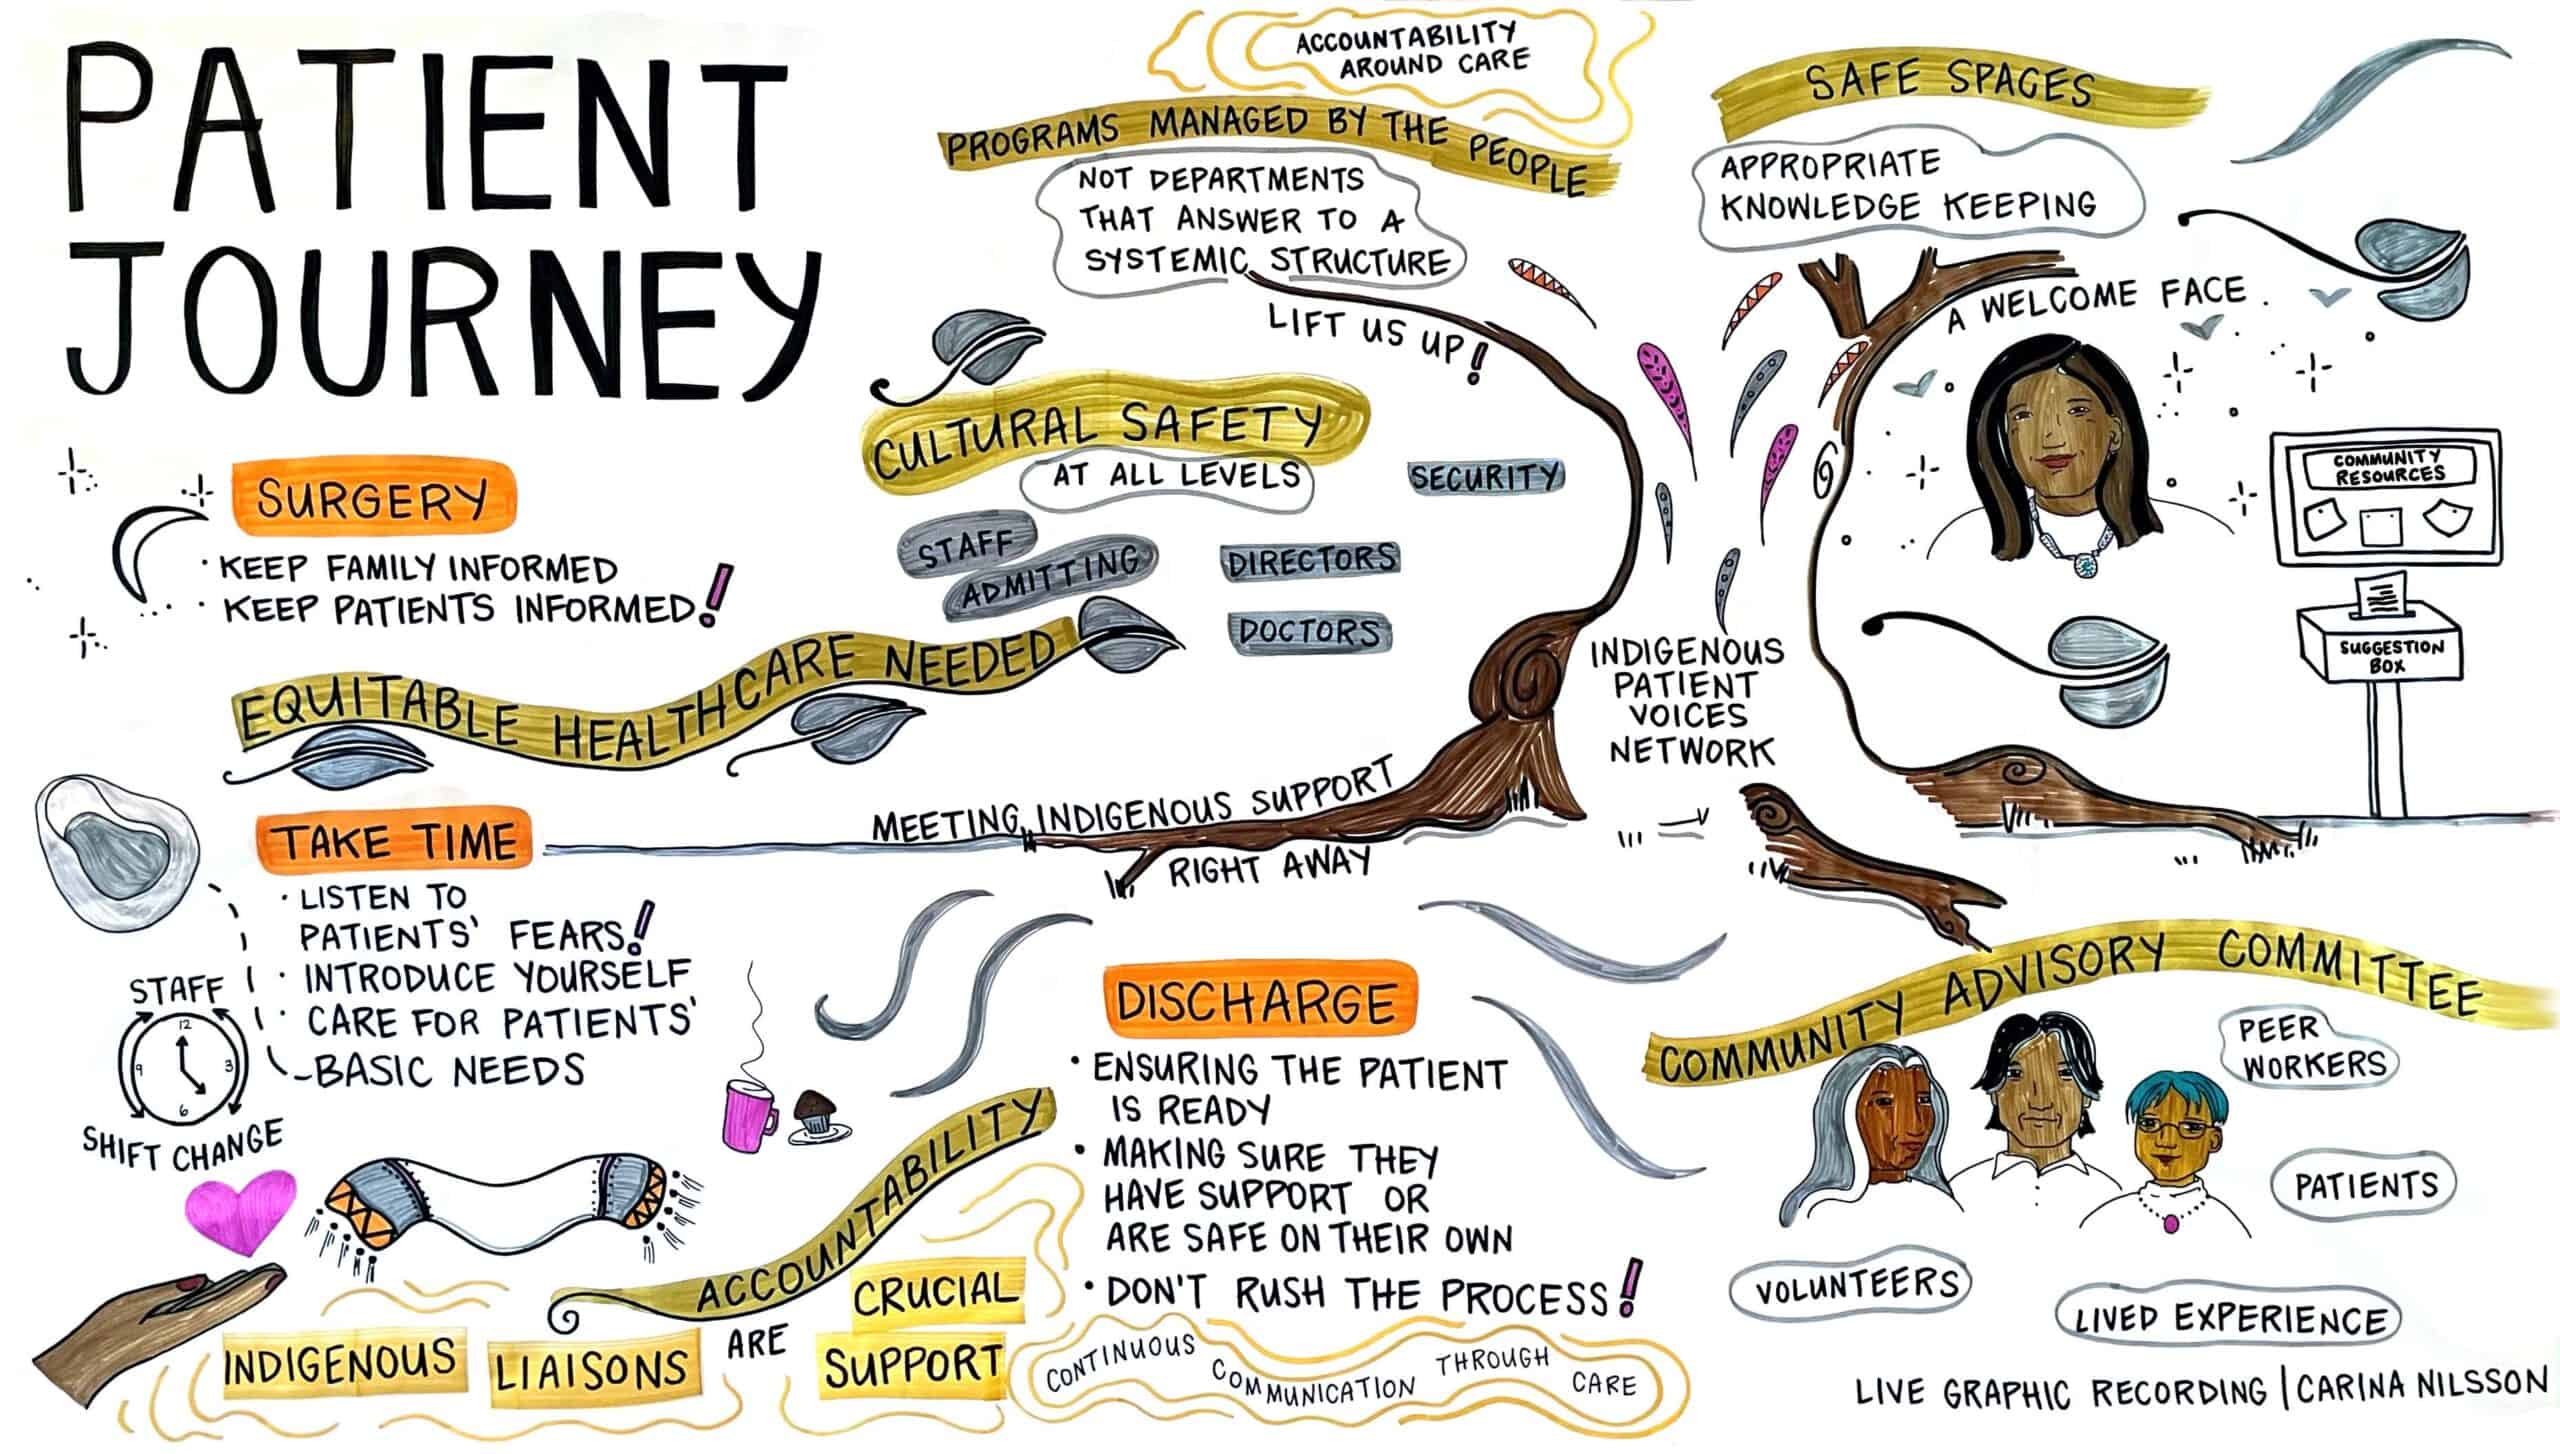 Patient journey mapping is key to our commitment to Indigenous Wellness and Reconciliation